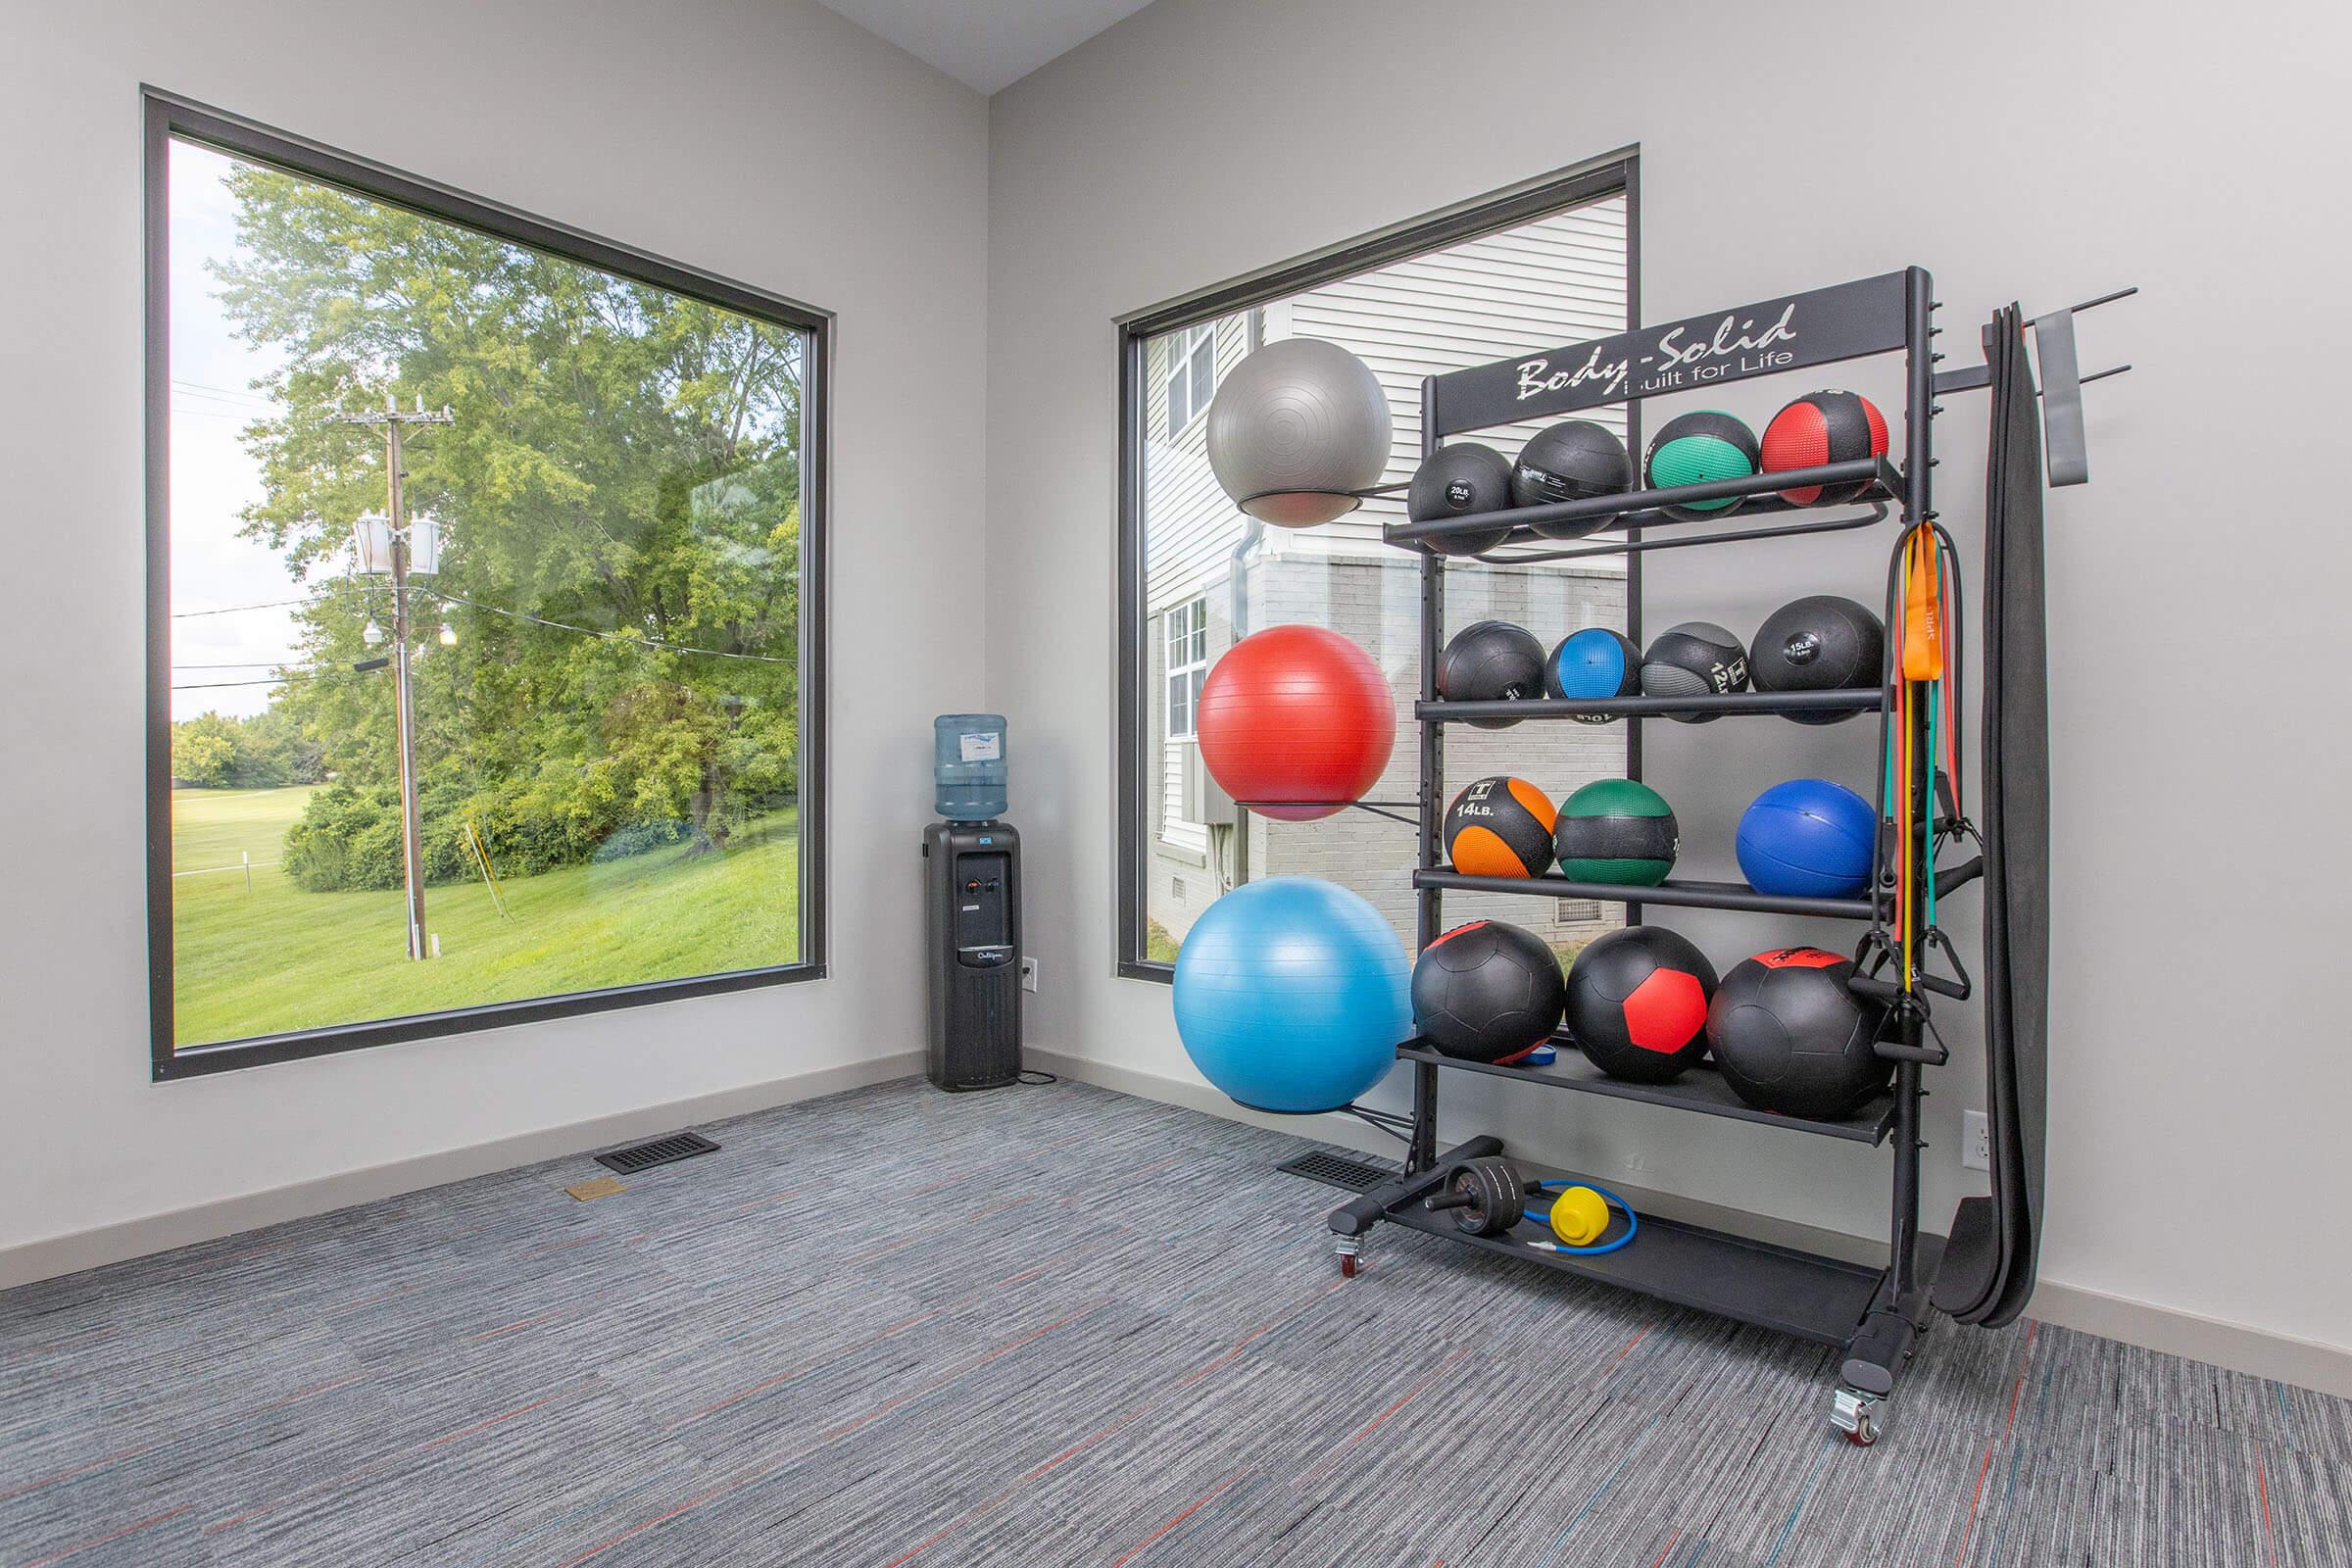 STAY IN SHAPE AT OUR FITNESS CENTER